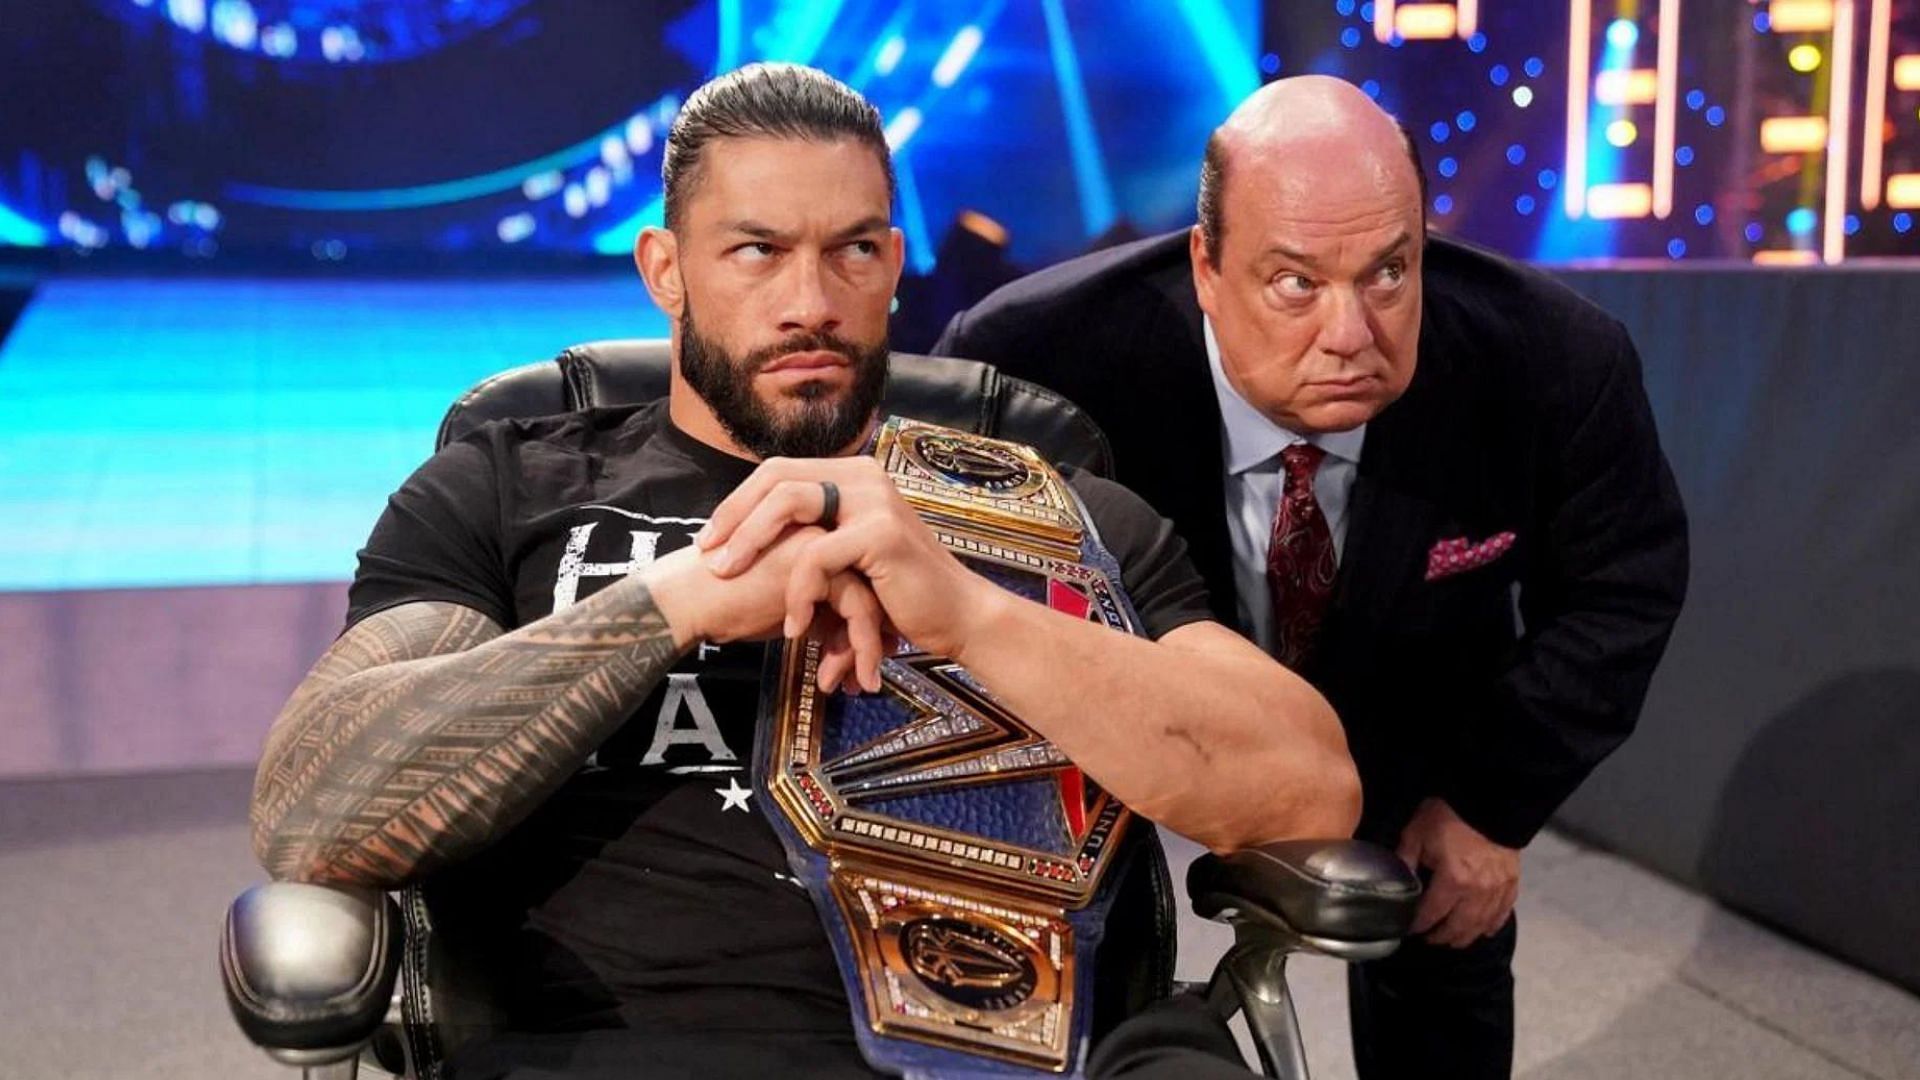 Reigns is set to return tonight on SmackDown.